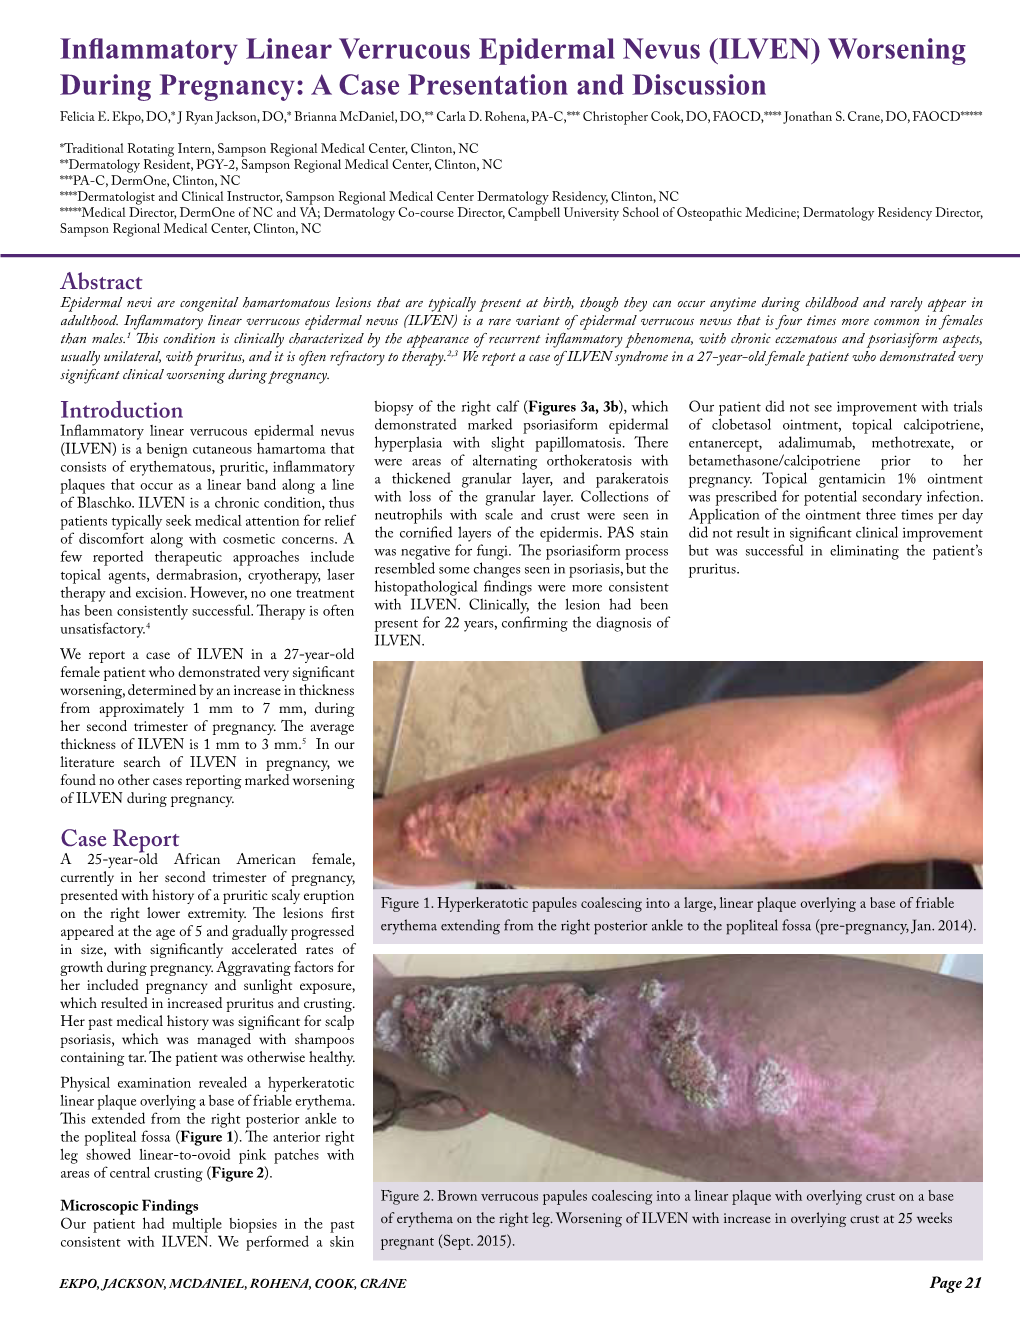 Inflammatory Linear Verrucous Epidermal Nevus (ILVEN) Worsening During Pregnancy: a Case Presentation and Discussion Felicia E